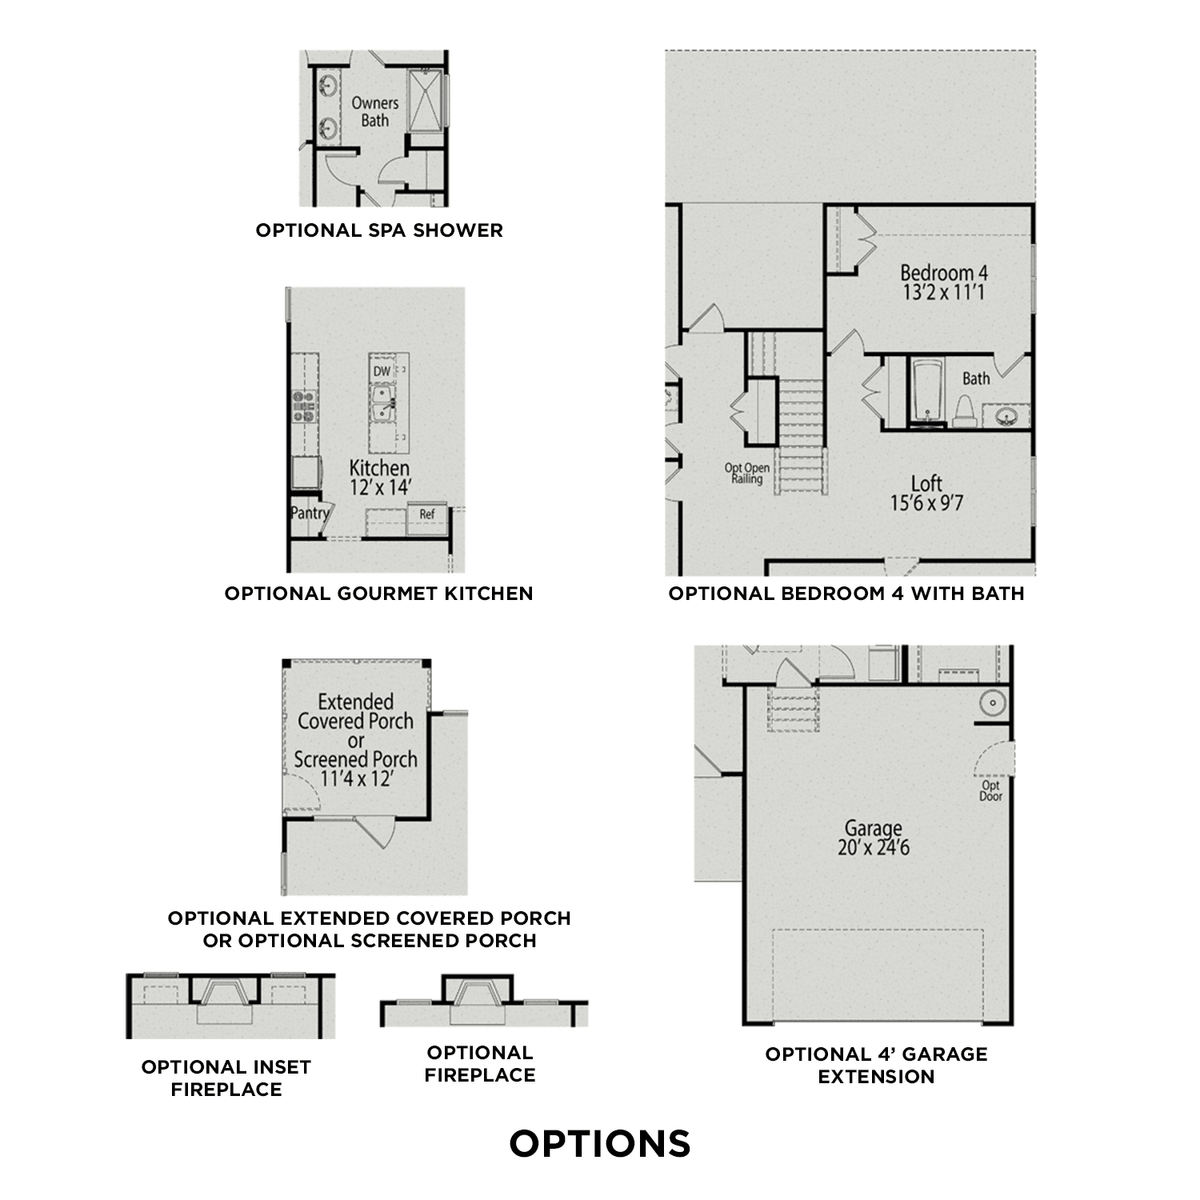 3 - The Ash D floor plan layout for 34 Looping Court in Davidson Homes' Tobacco Road community.